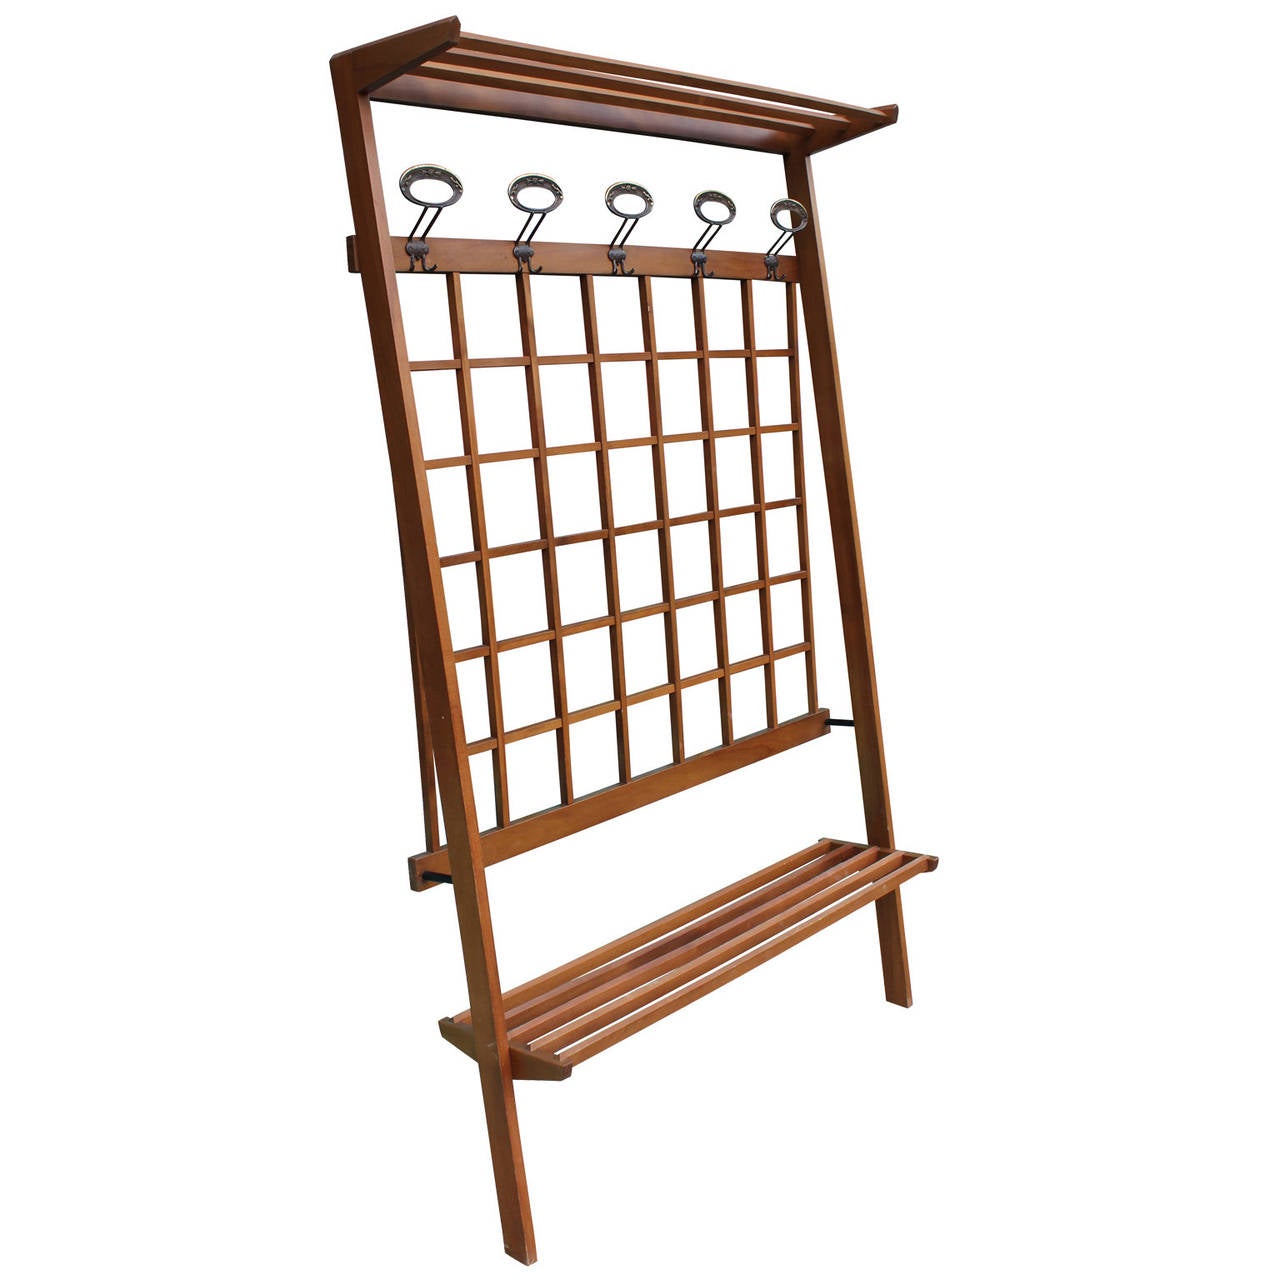 Incredible Italian hall tree. Decorative lattice work makes up the back portion. Five brass hooks provide jacket storage. A shoe rack and top rack provide additional storage. Hall tree fixes to wall. Would work great for a mud room.